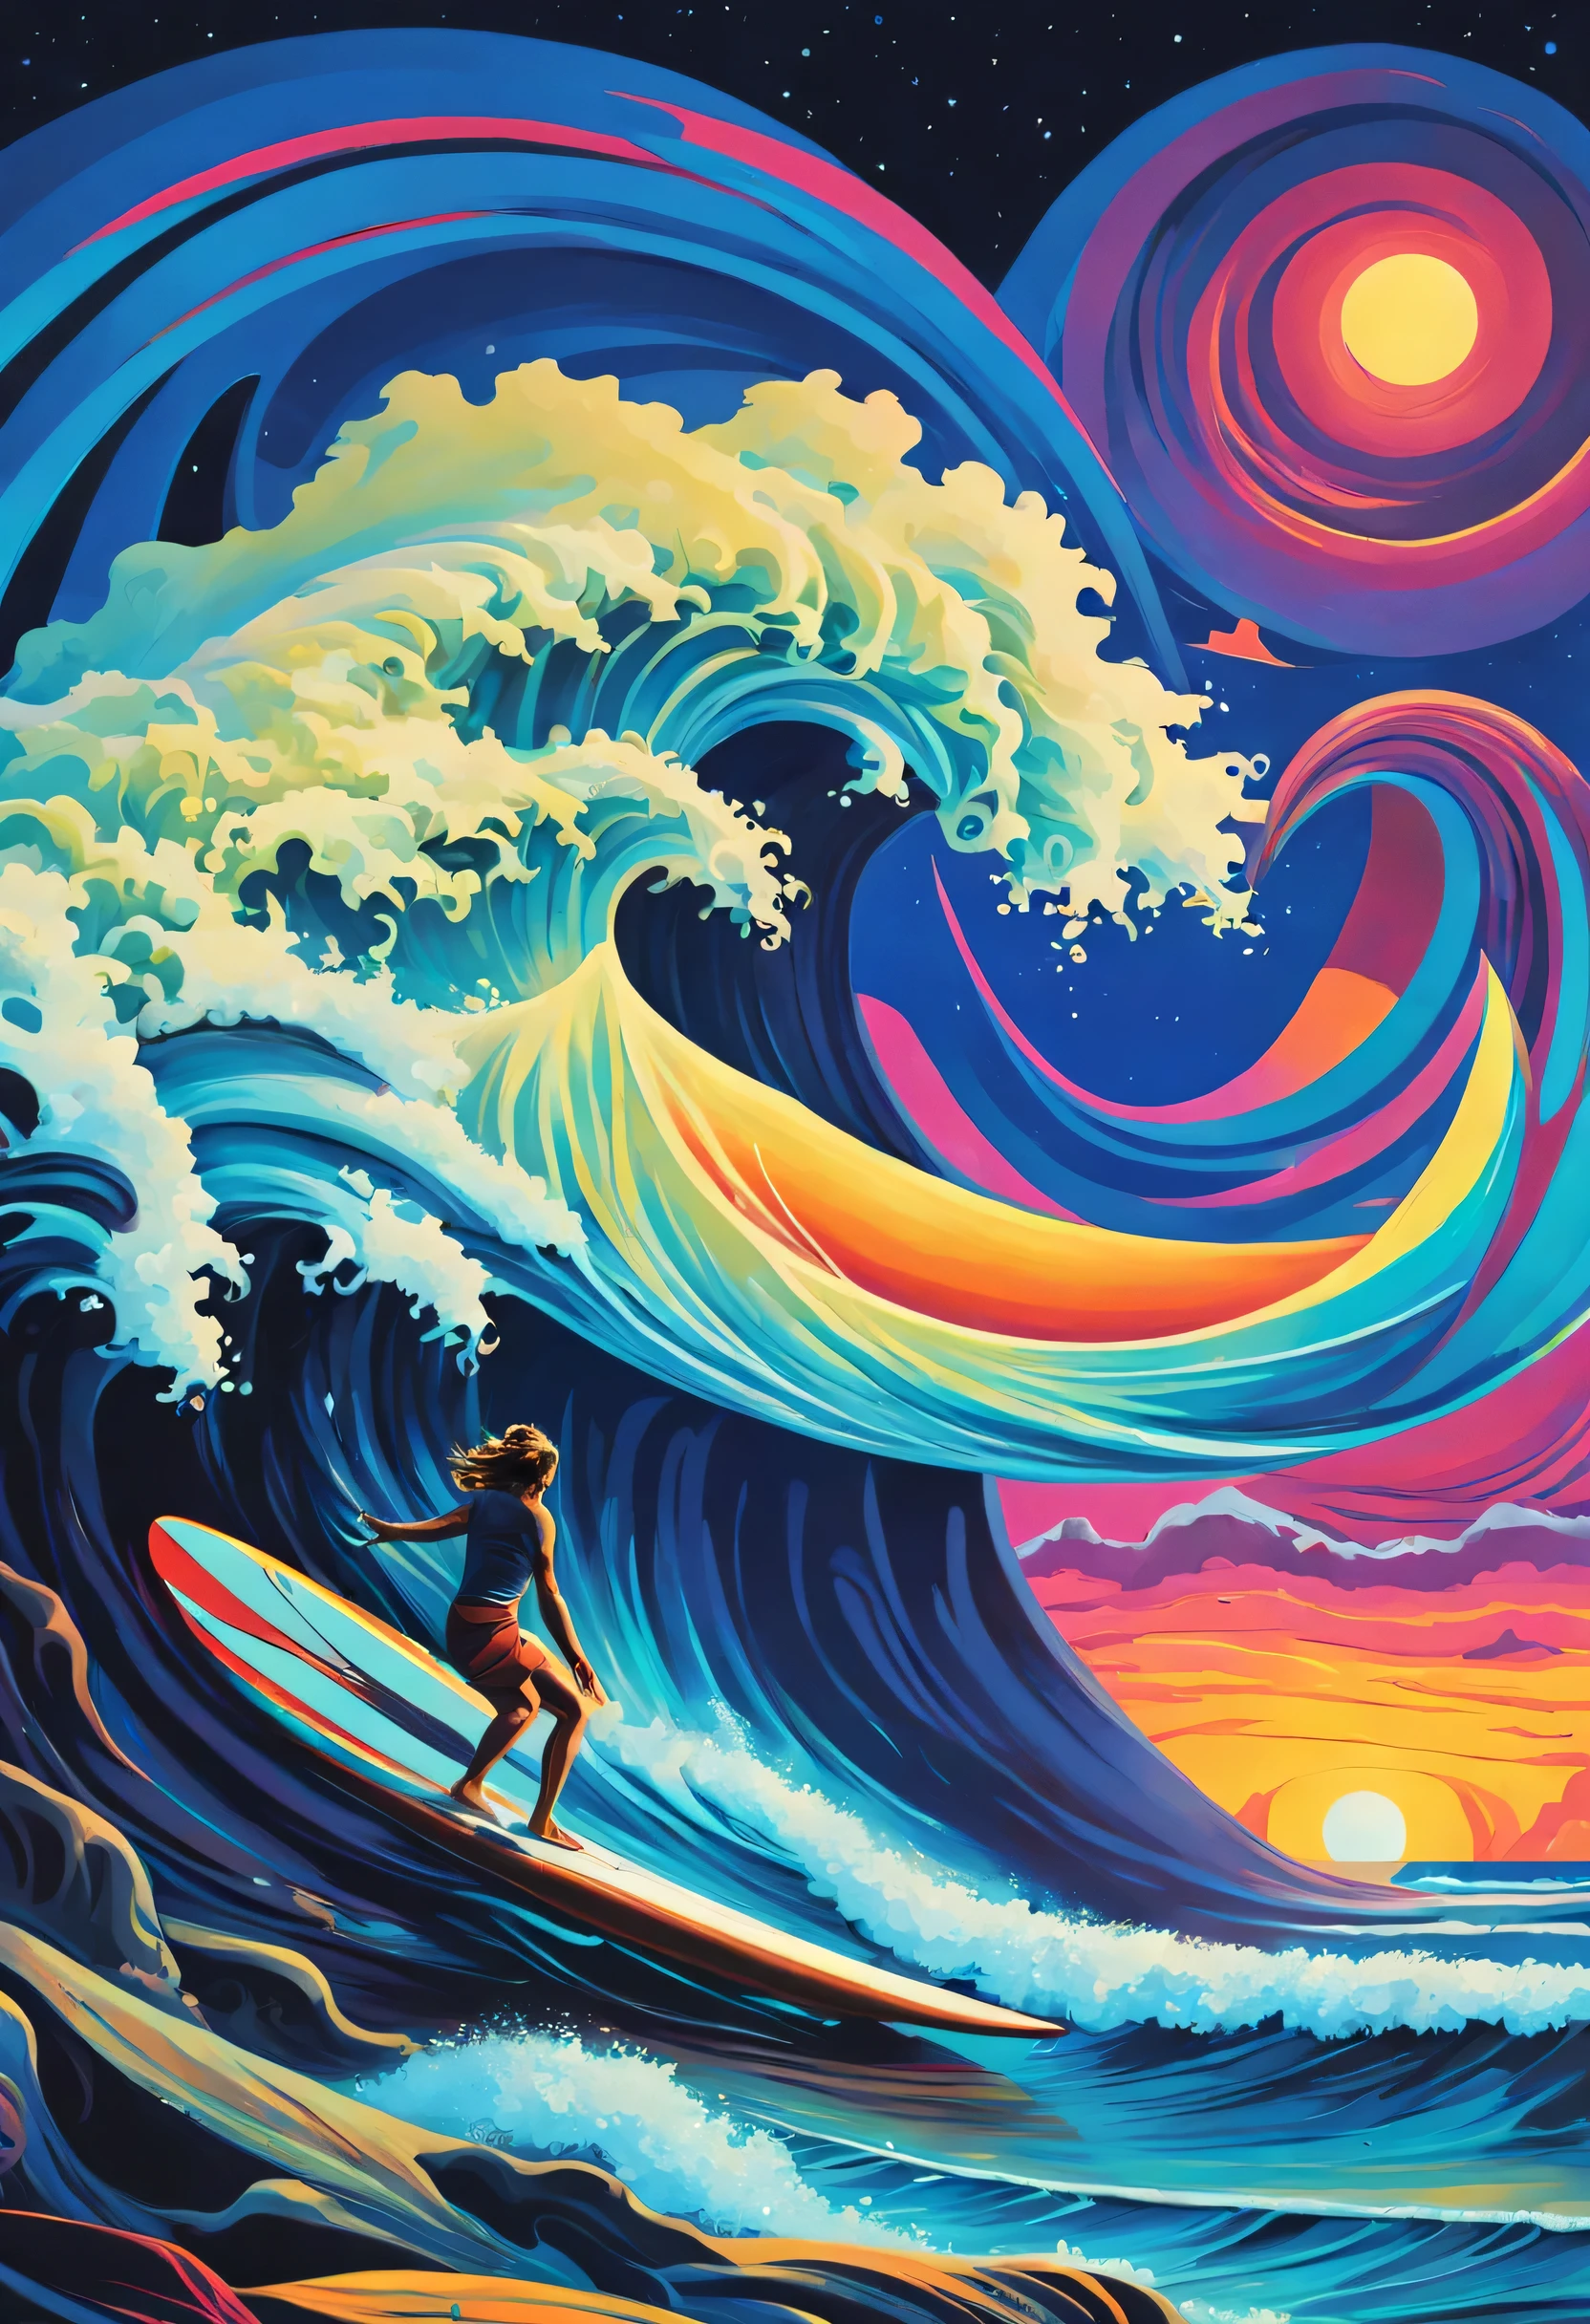 Create a surreal CGI artwork that combines philosophy and surfing in an extravagantly strange style.. Imagine un paisaje marino crepuscular donde las olas se transforman en flotadores., arcane symbols. Features a surfer navigating cosmic knowledge atop a levitating board.. Infuse vivid, Otherworldly colors with a touch of surrealism in the style of Salvador Dalí.. Mantenlo conciso, make it strange, and ensure an eccentric mix of philosophy and surfing that transcends the ordinary